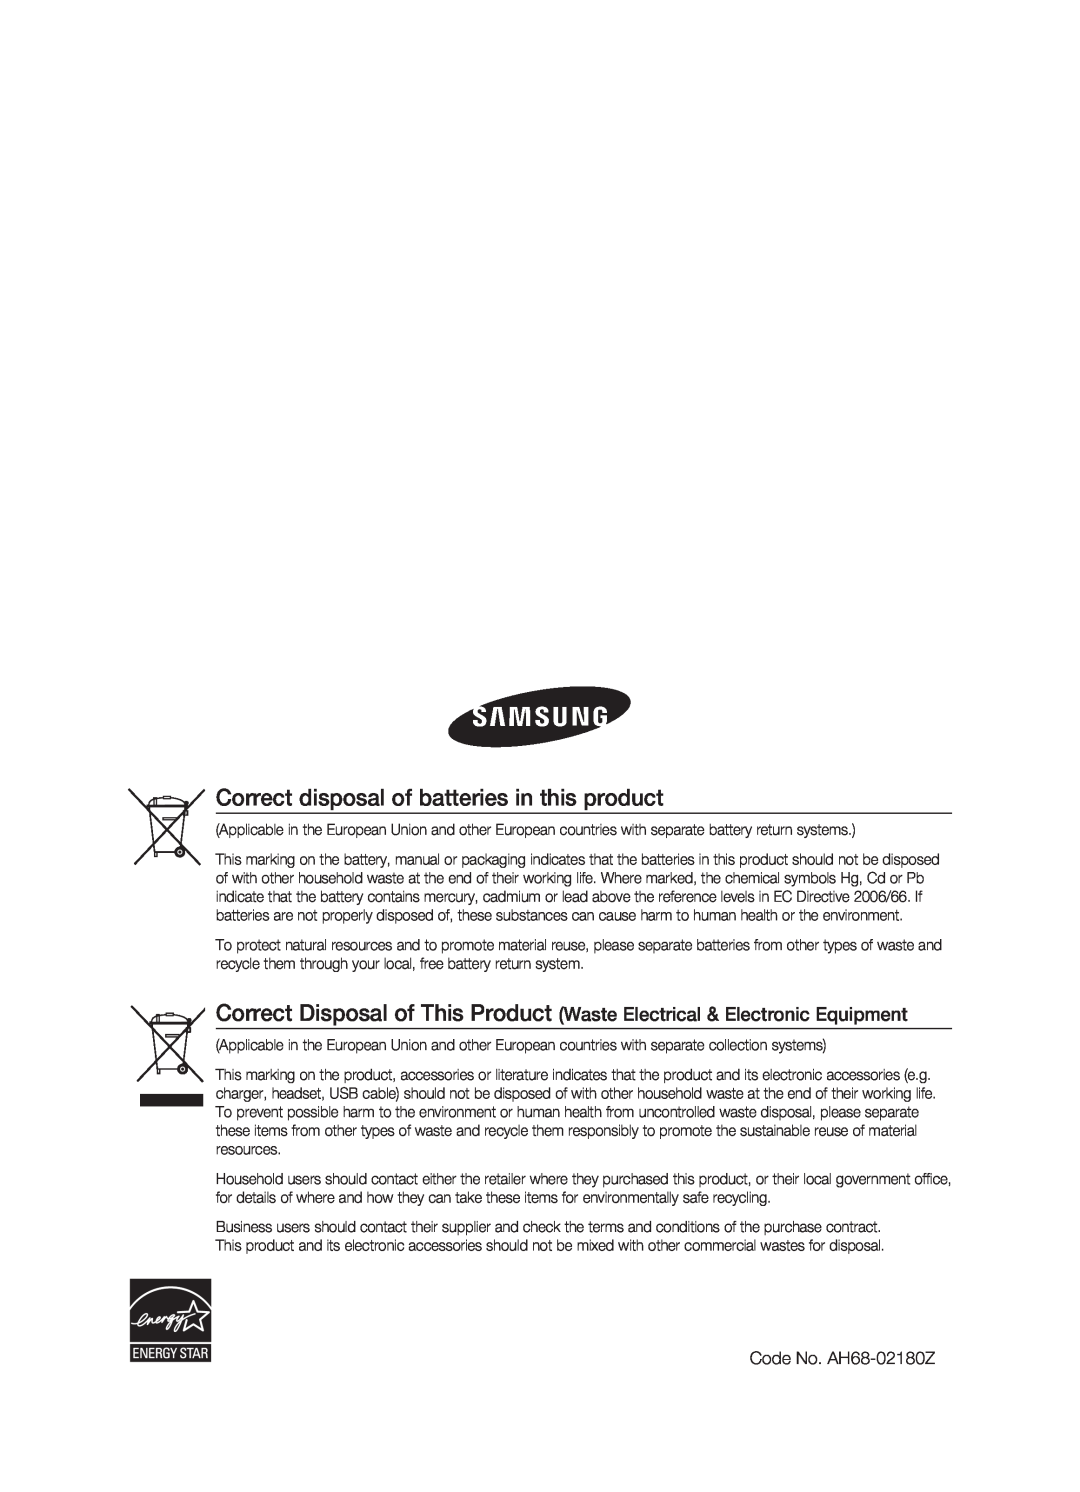 Samsung HT-TX725G, HT-X725G user manual Correct disposal of batteries in this product, Code No. AH68-02180Z 